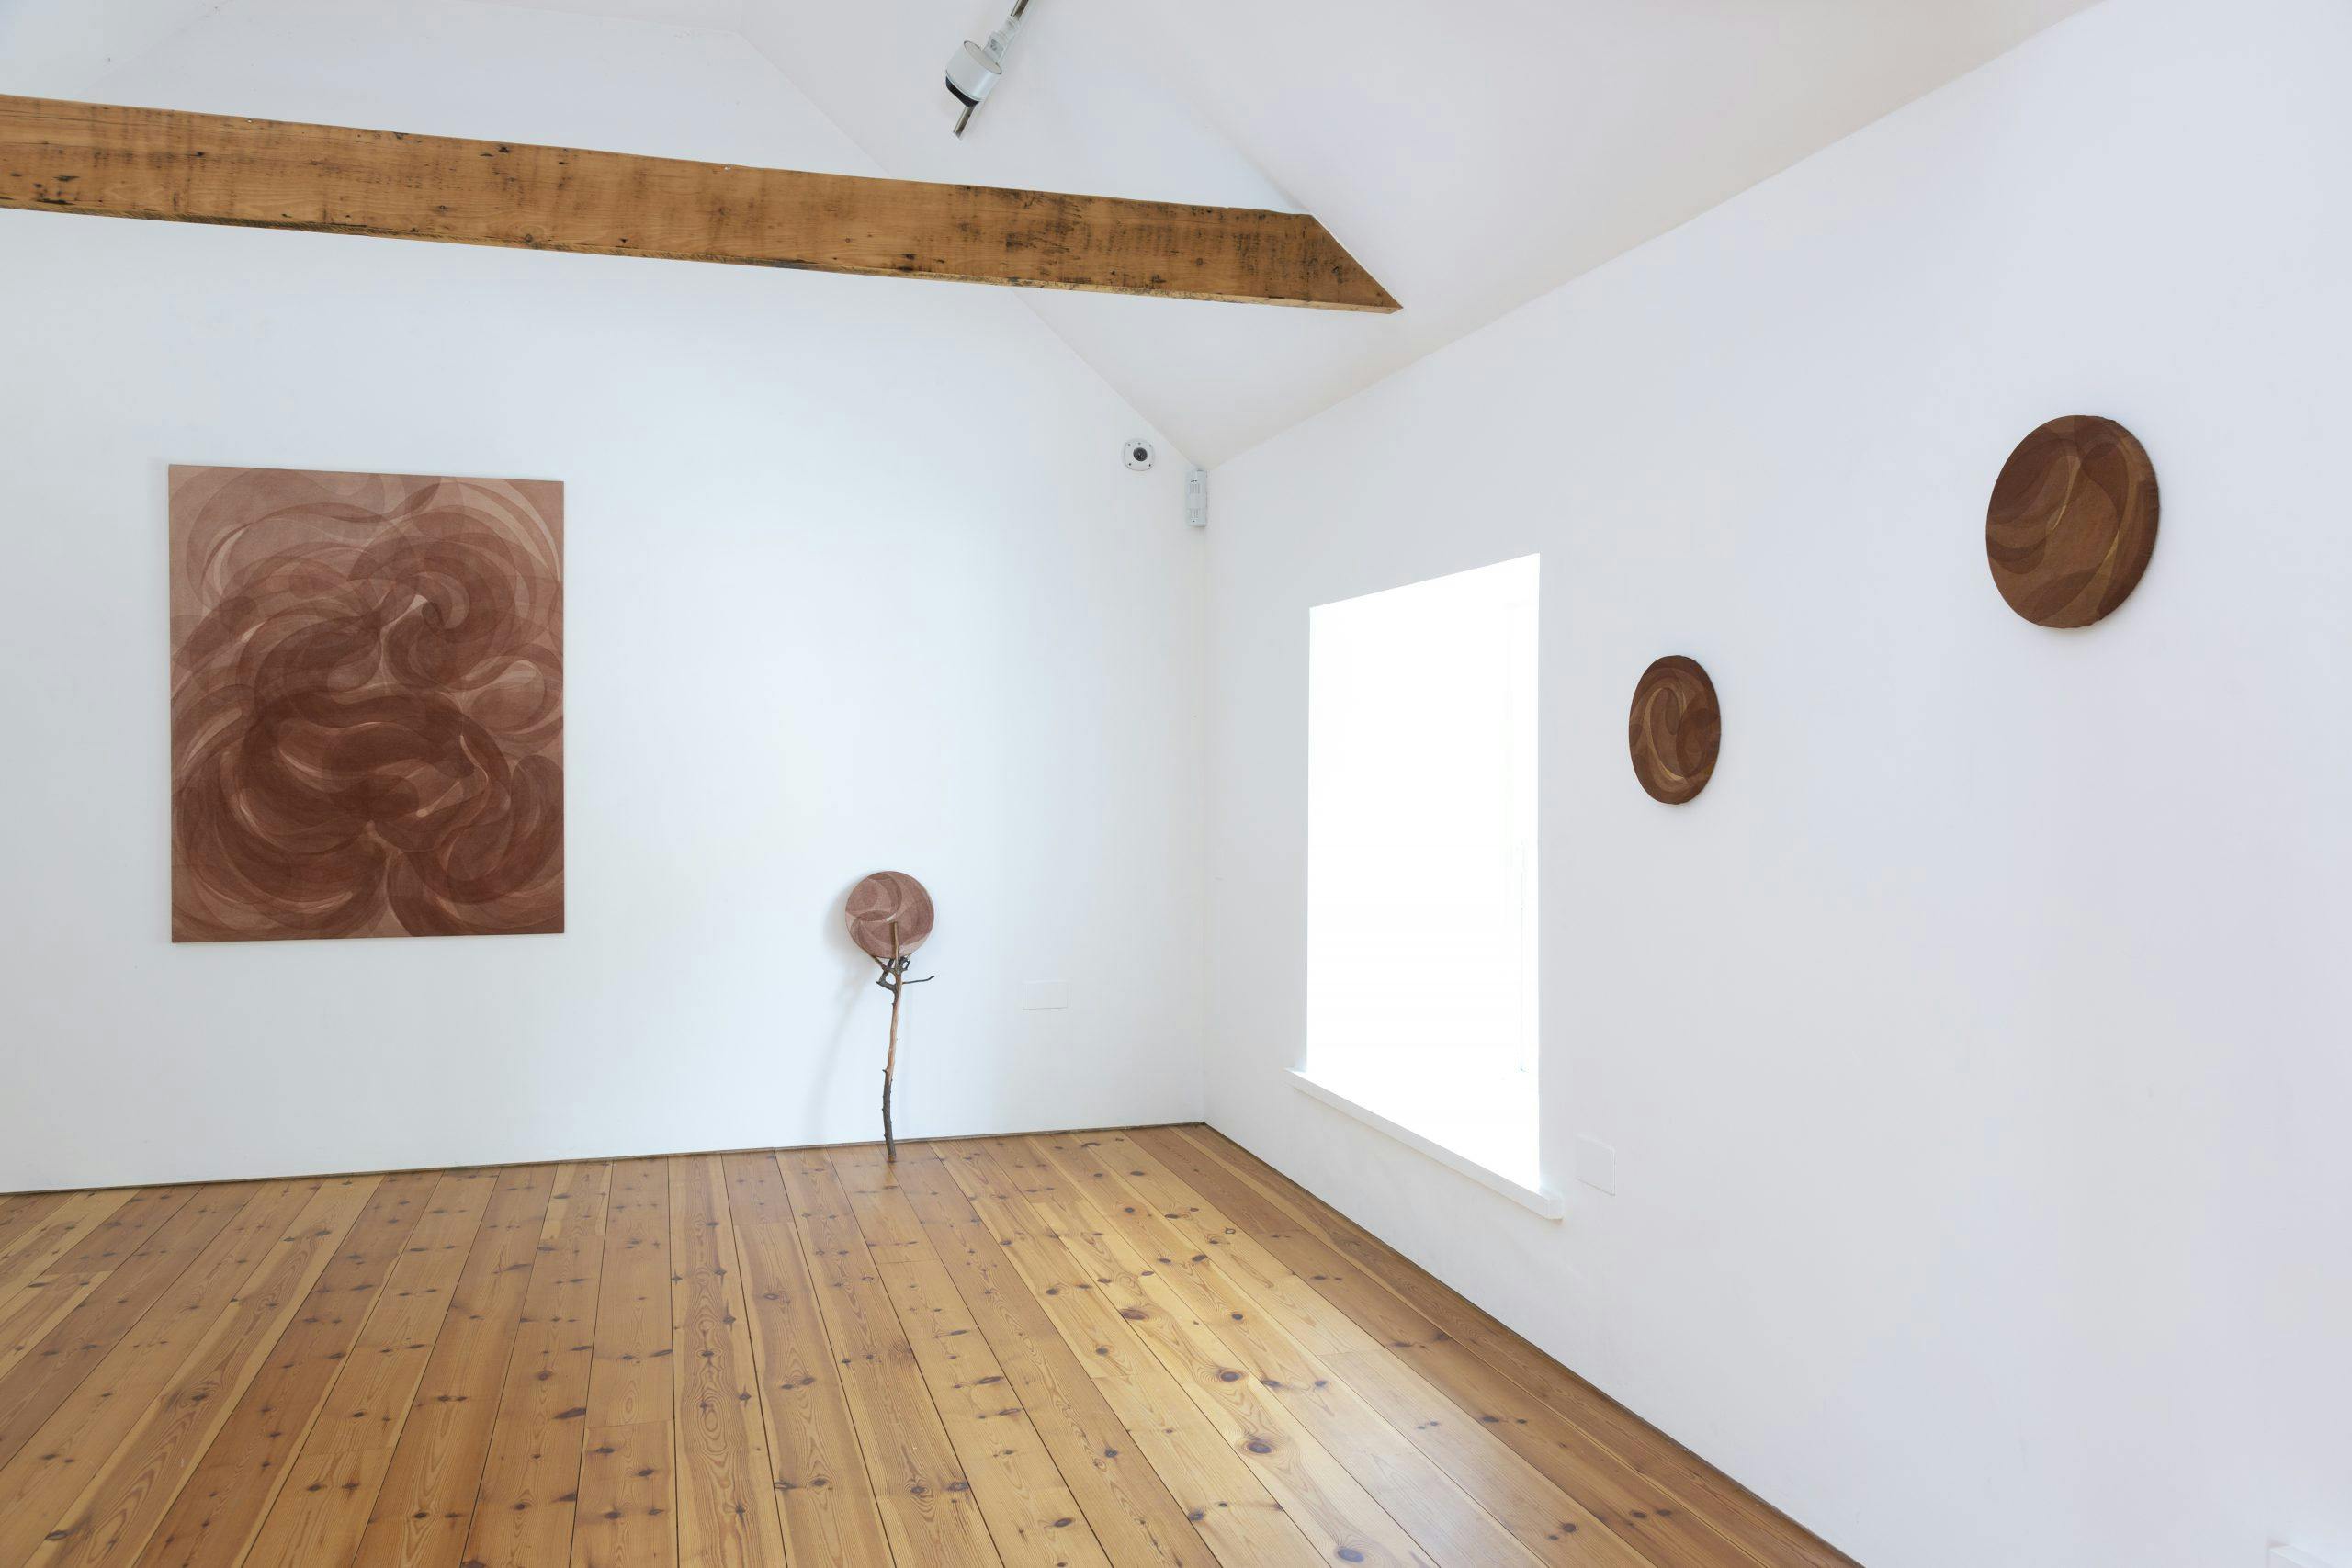 brown-scale paintings of various sizes and shapes are installed on white walls. One small round painting is propped up on a twig. 